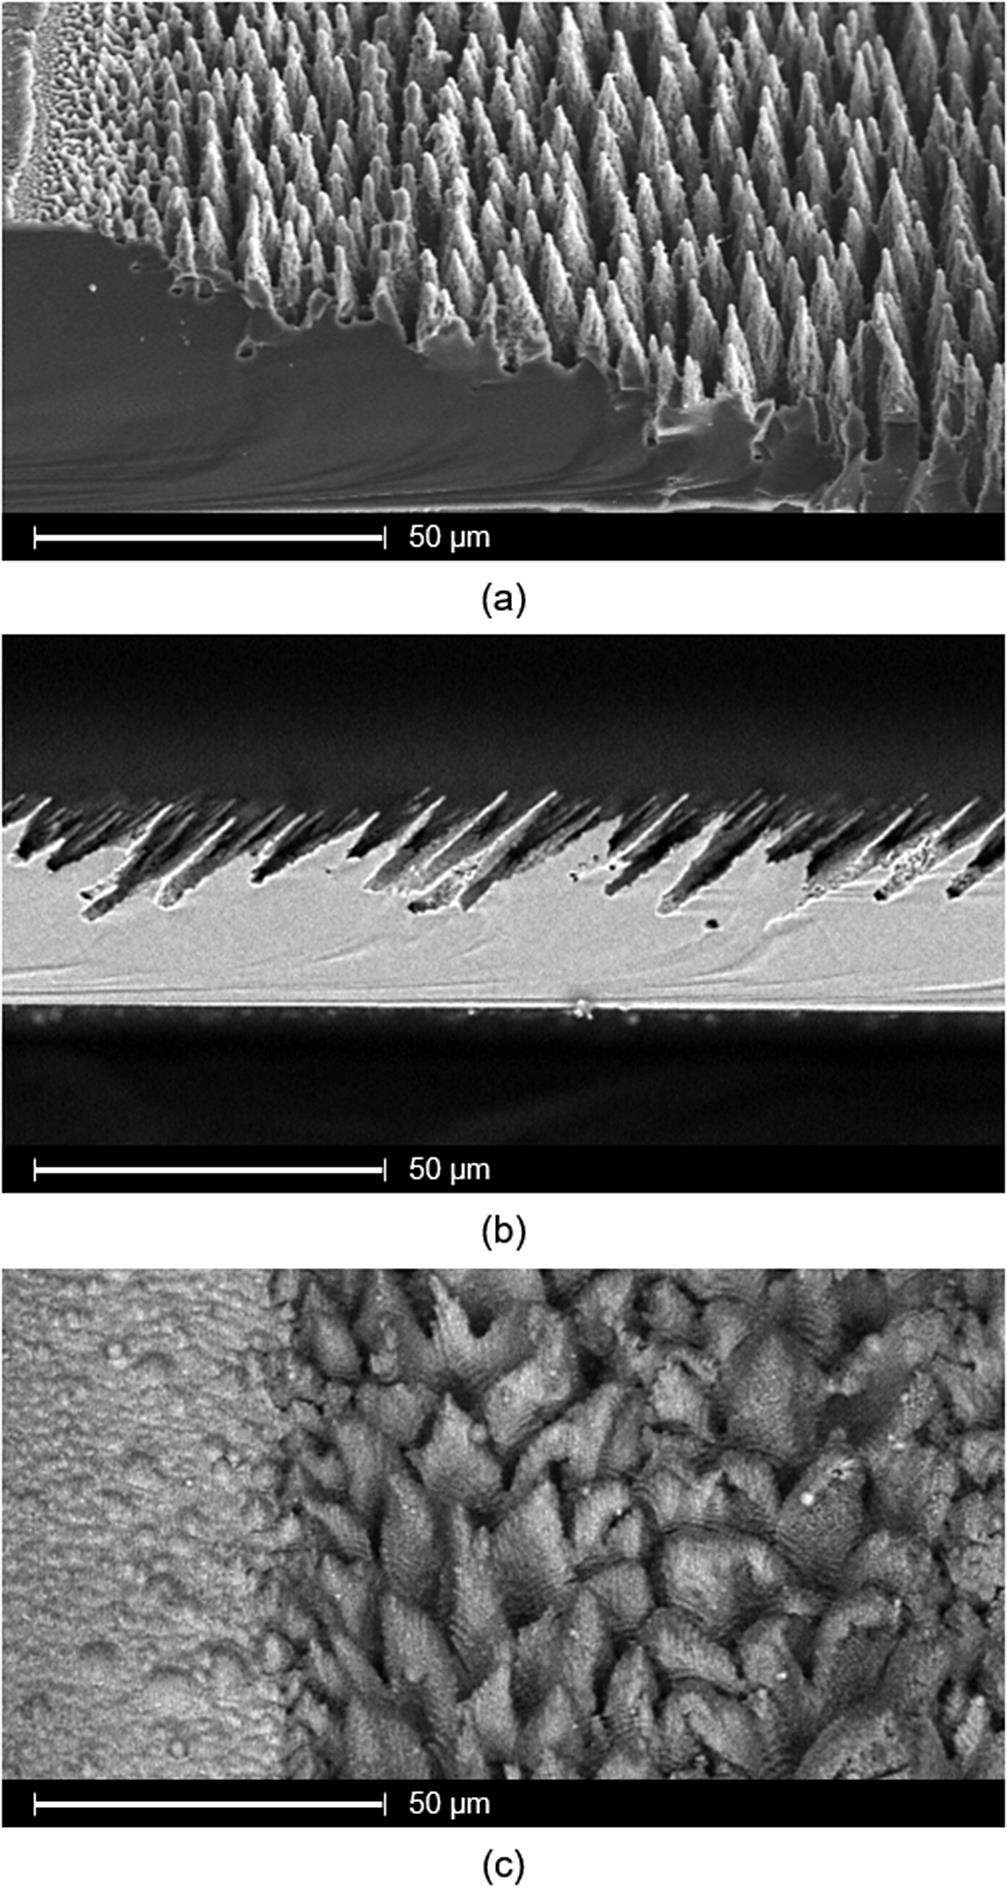 SEM images of laser-induced microstructures. The top and middle images show cross sections of Si processed in 600 mbar SF6. For (a) the pulse number was increased from 0 to 1500 pulses from left to right at a fluence of approximately 8 kJ m. The sample is viewed at 30°. The slanted structures in (b) are created with a laser incidence angle of 45°, a fluence of approximately 9 kJ m and roughly 1000 pulses. This sample is viewed at 90°. The bottom image (c) shows Ti microstructures fabricated in 7 mbar vacuum with different laser fluences. Low fluences below the ablation threshold lead to ripples (left third) whereas higher fluences (up to 20 kJ m) generate broad cones (two thirds on the right).